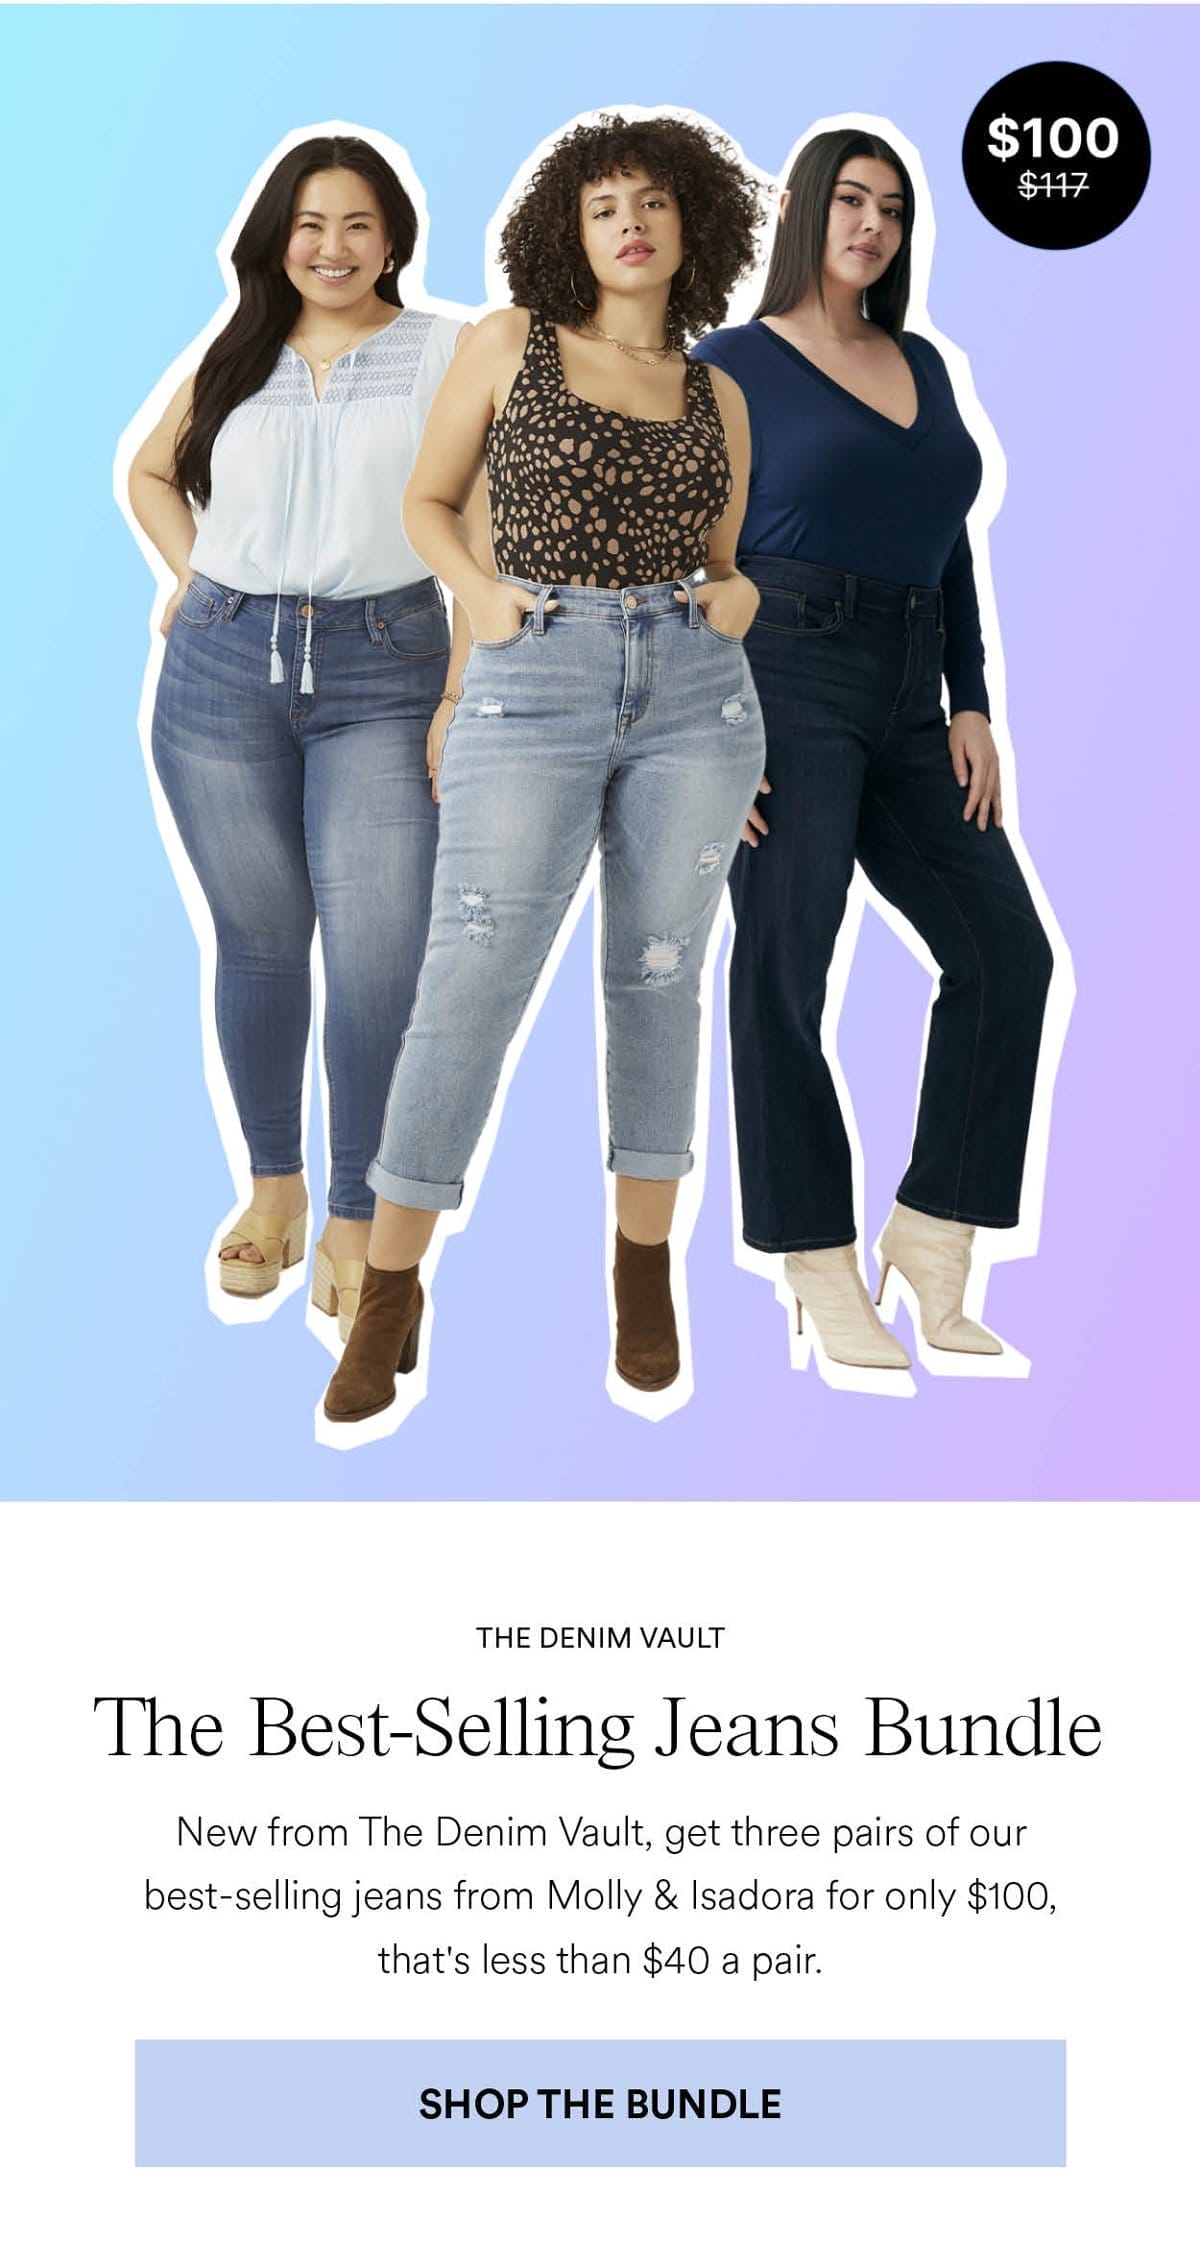 The Best-Selling Jeans Bundle. New from The Denim Vault, get three pairs of our best-selling jeans from Molly & Isadora for only \\$100, that's less than \\$40 a pair. Shop The Bundle